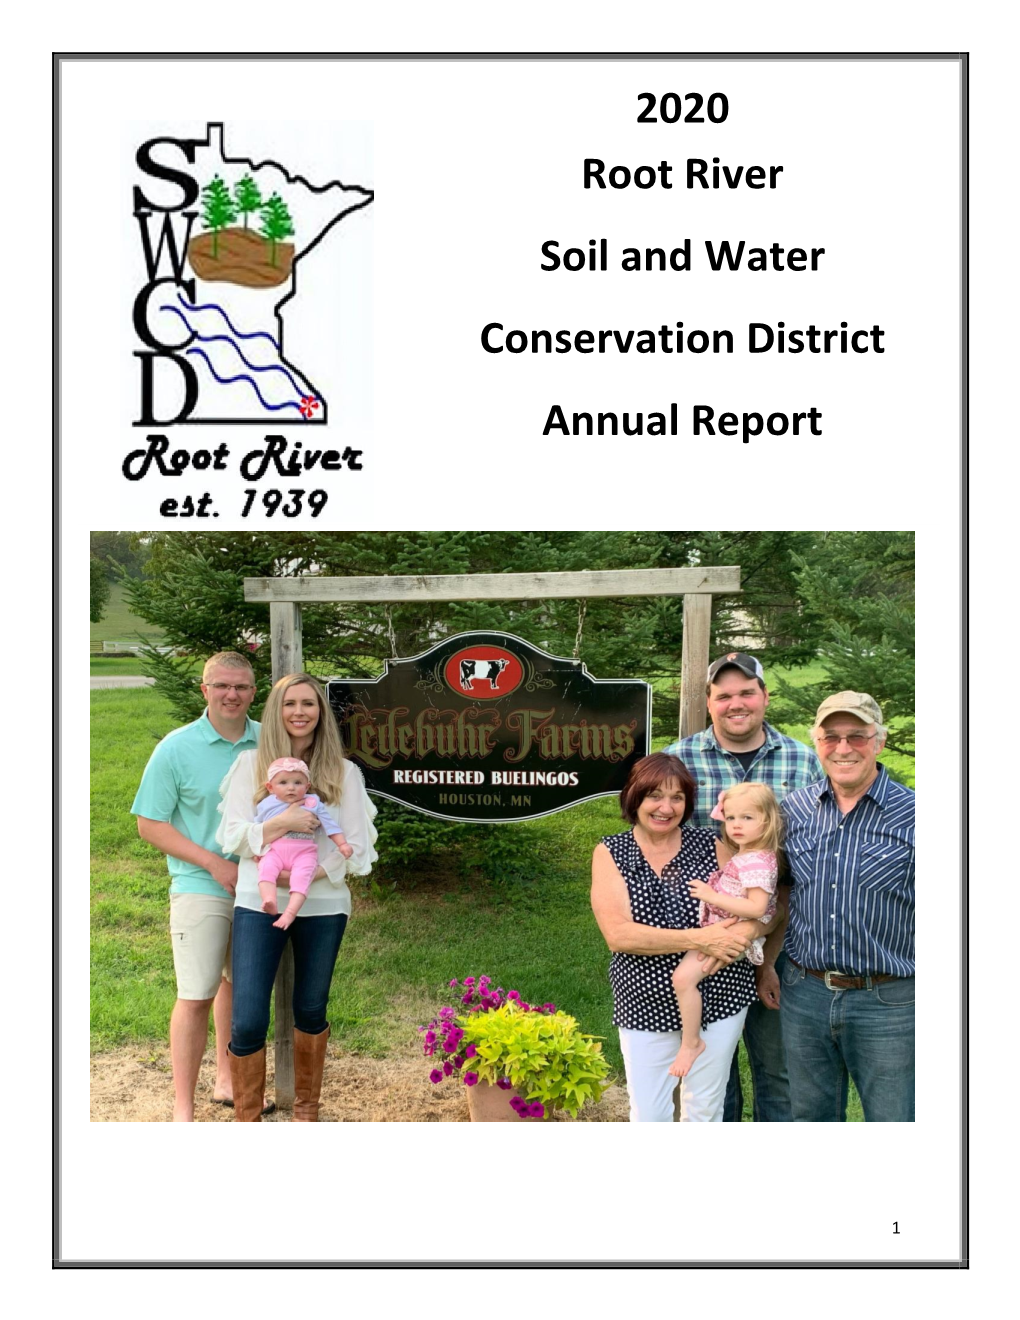 2020 Root River Soil and Water Conservation District Annual Report